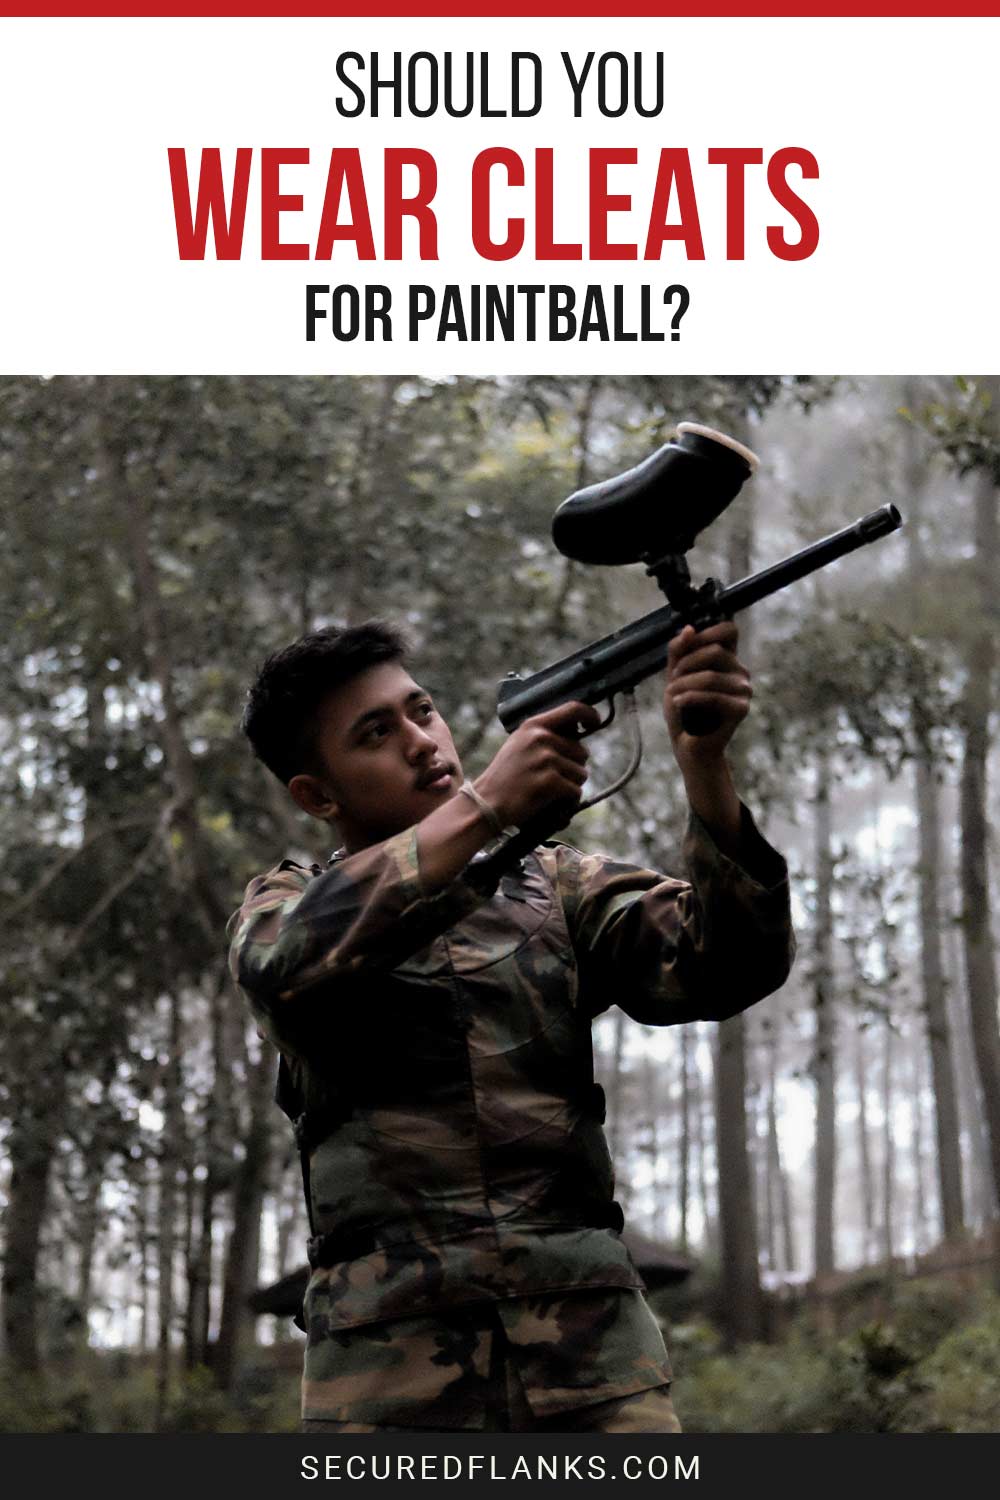 Man in camouflage pointing a paintball gun up - Should You Wear Cleats For Paintball?